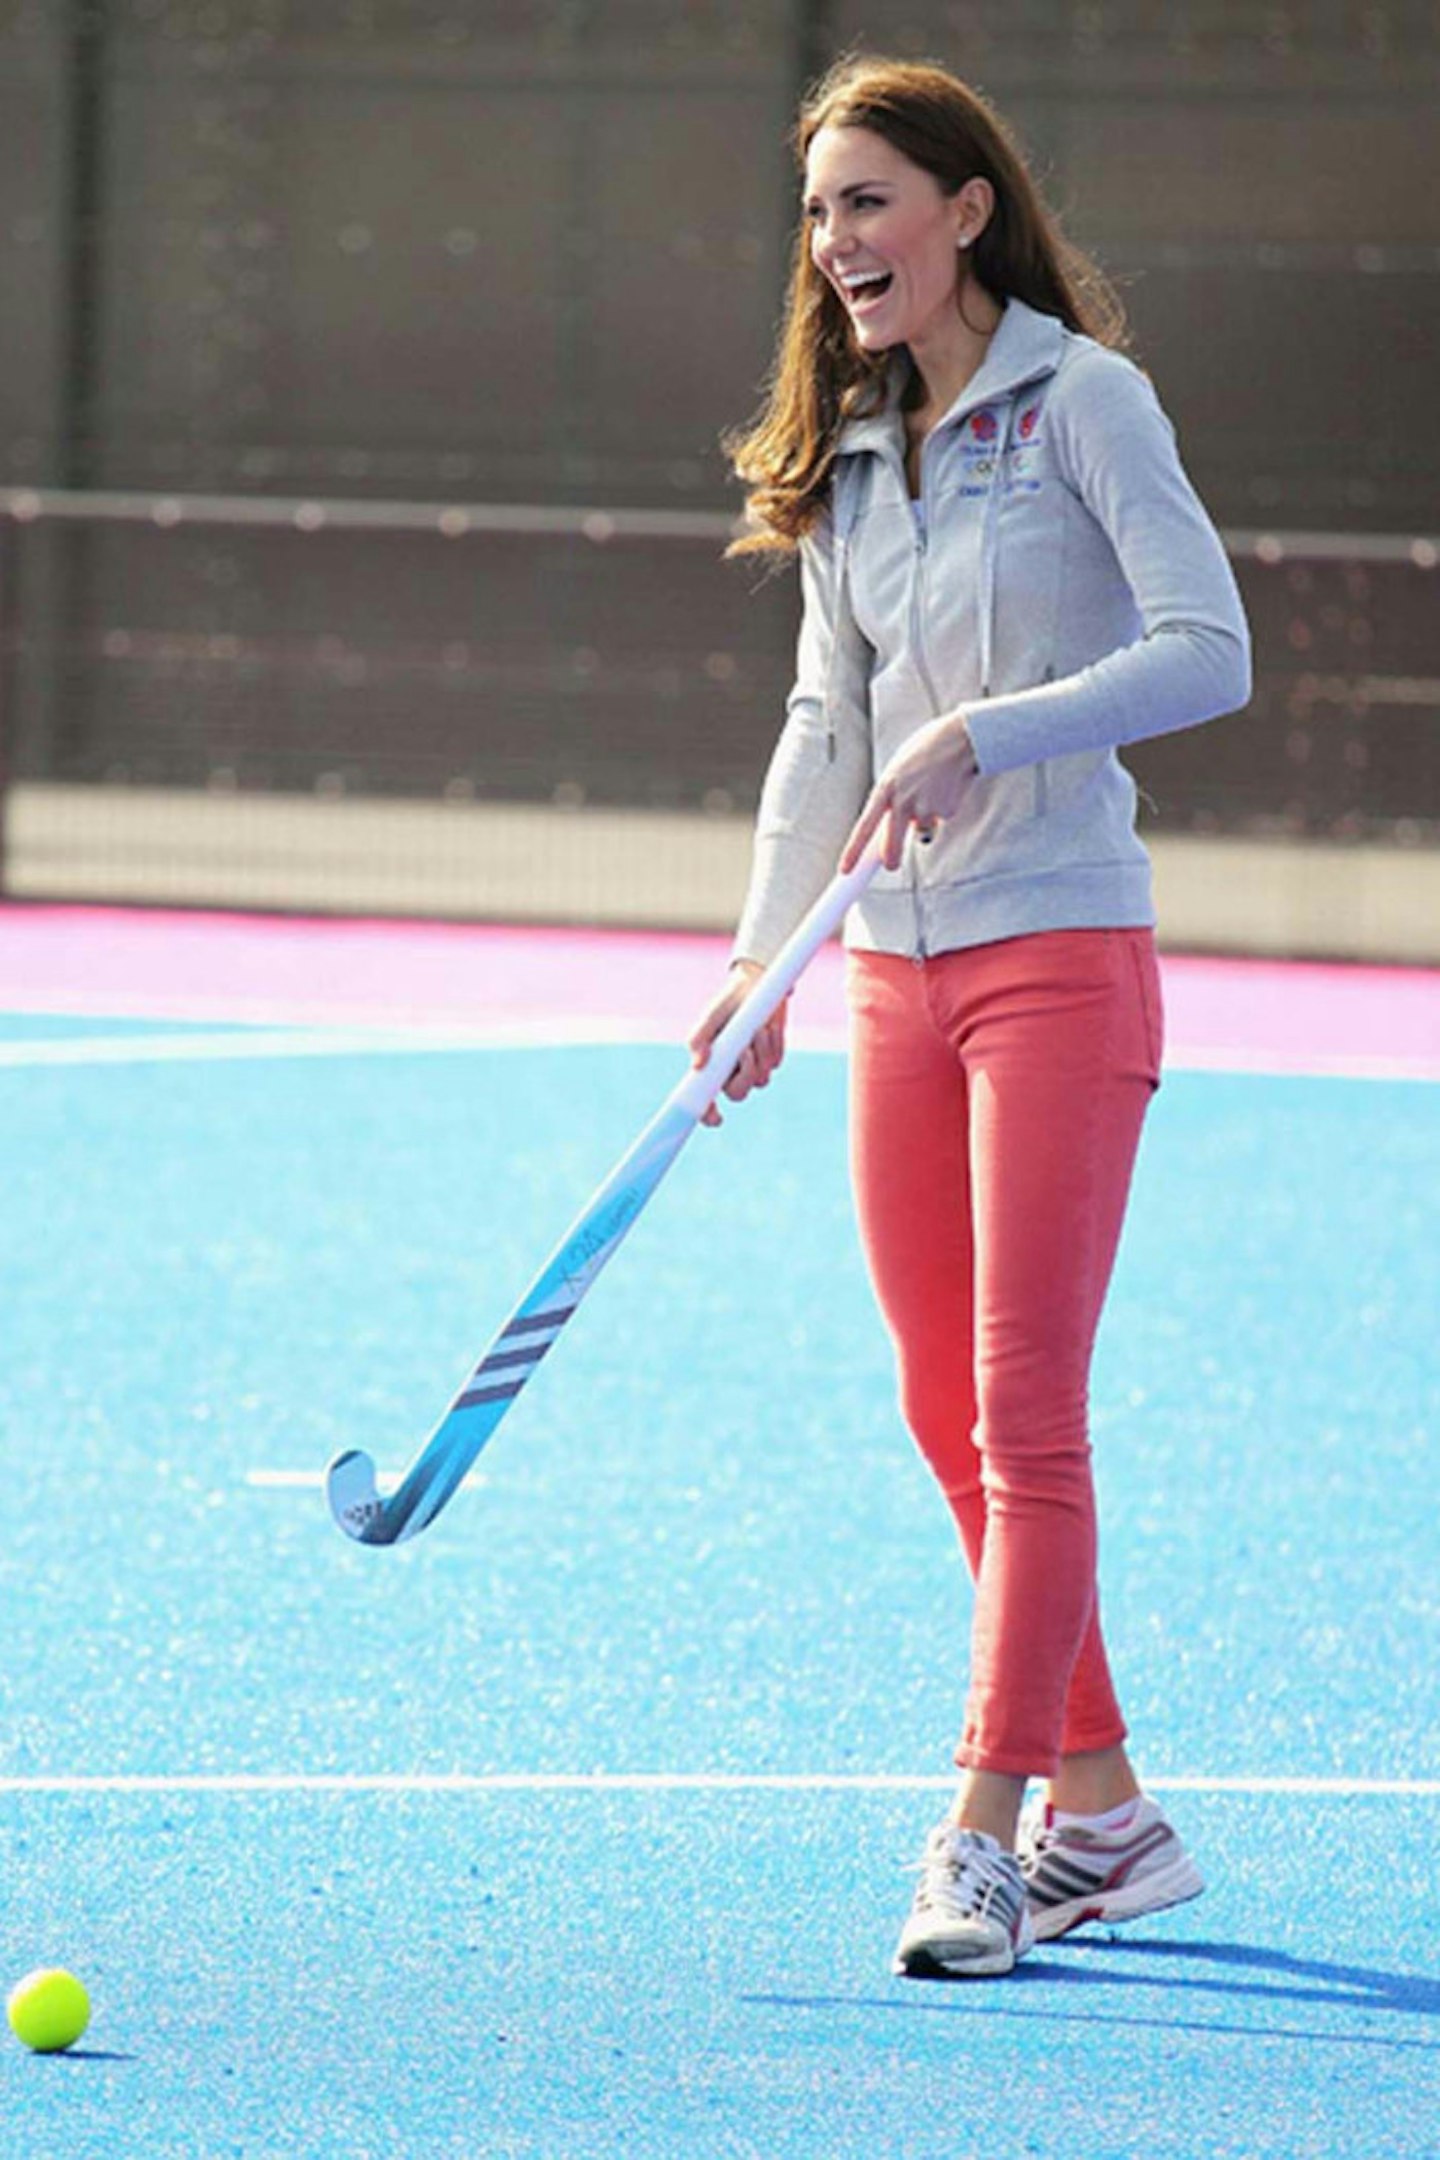 Kate Middleton Playing Hockey At The New Olympic Stadium, 15 March 2012